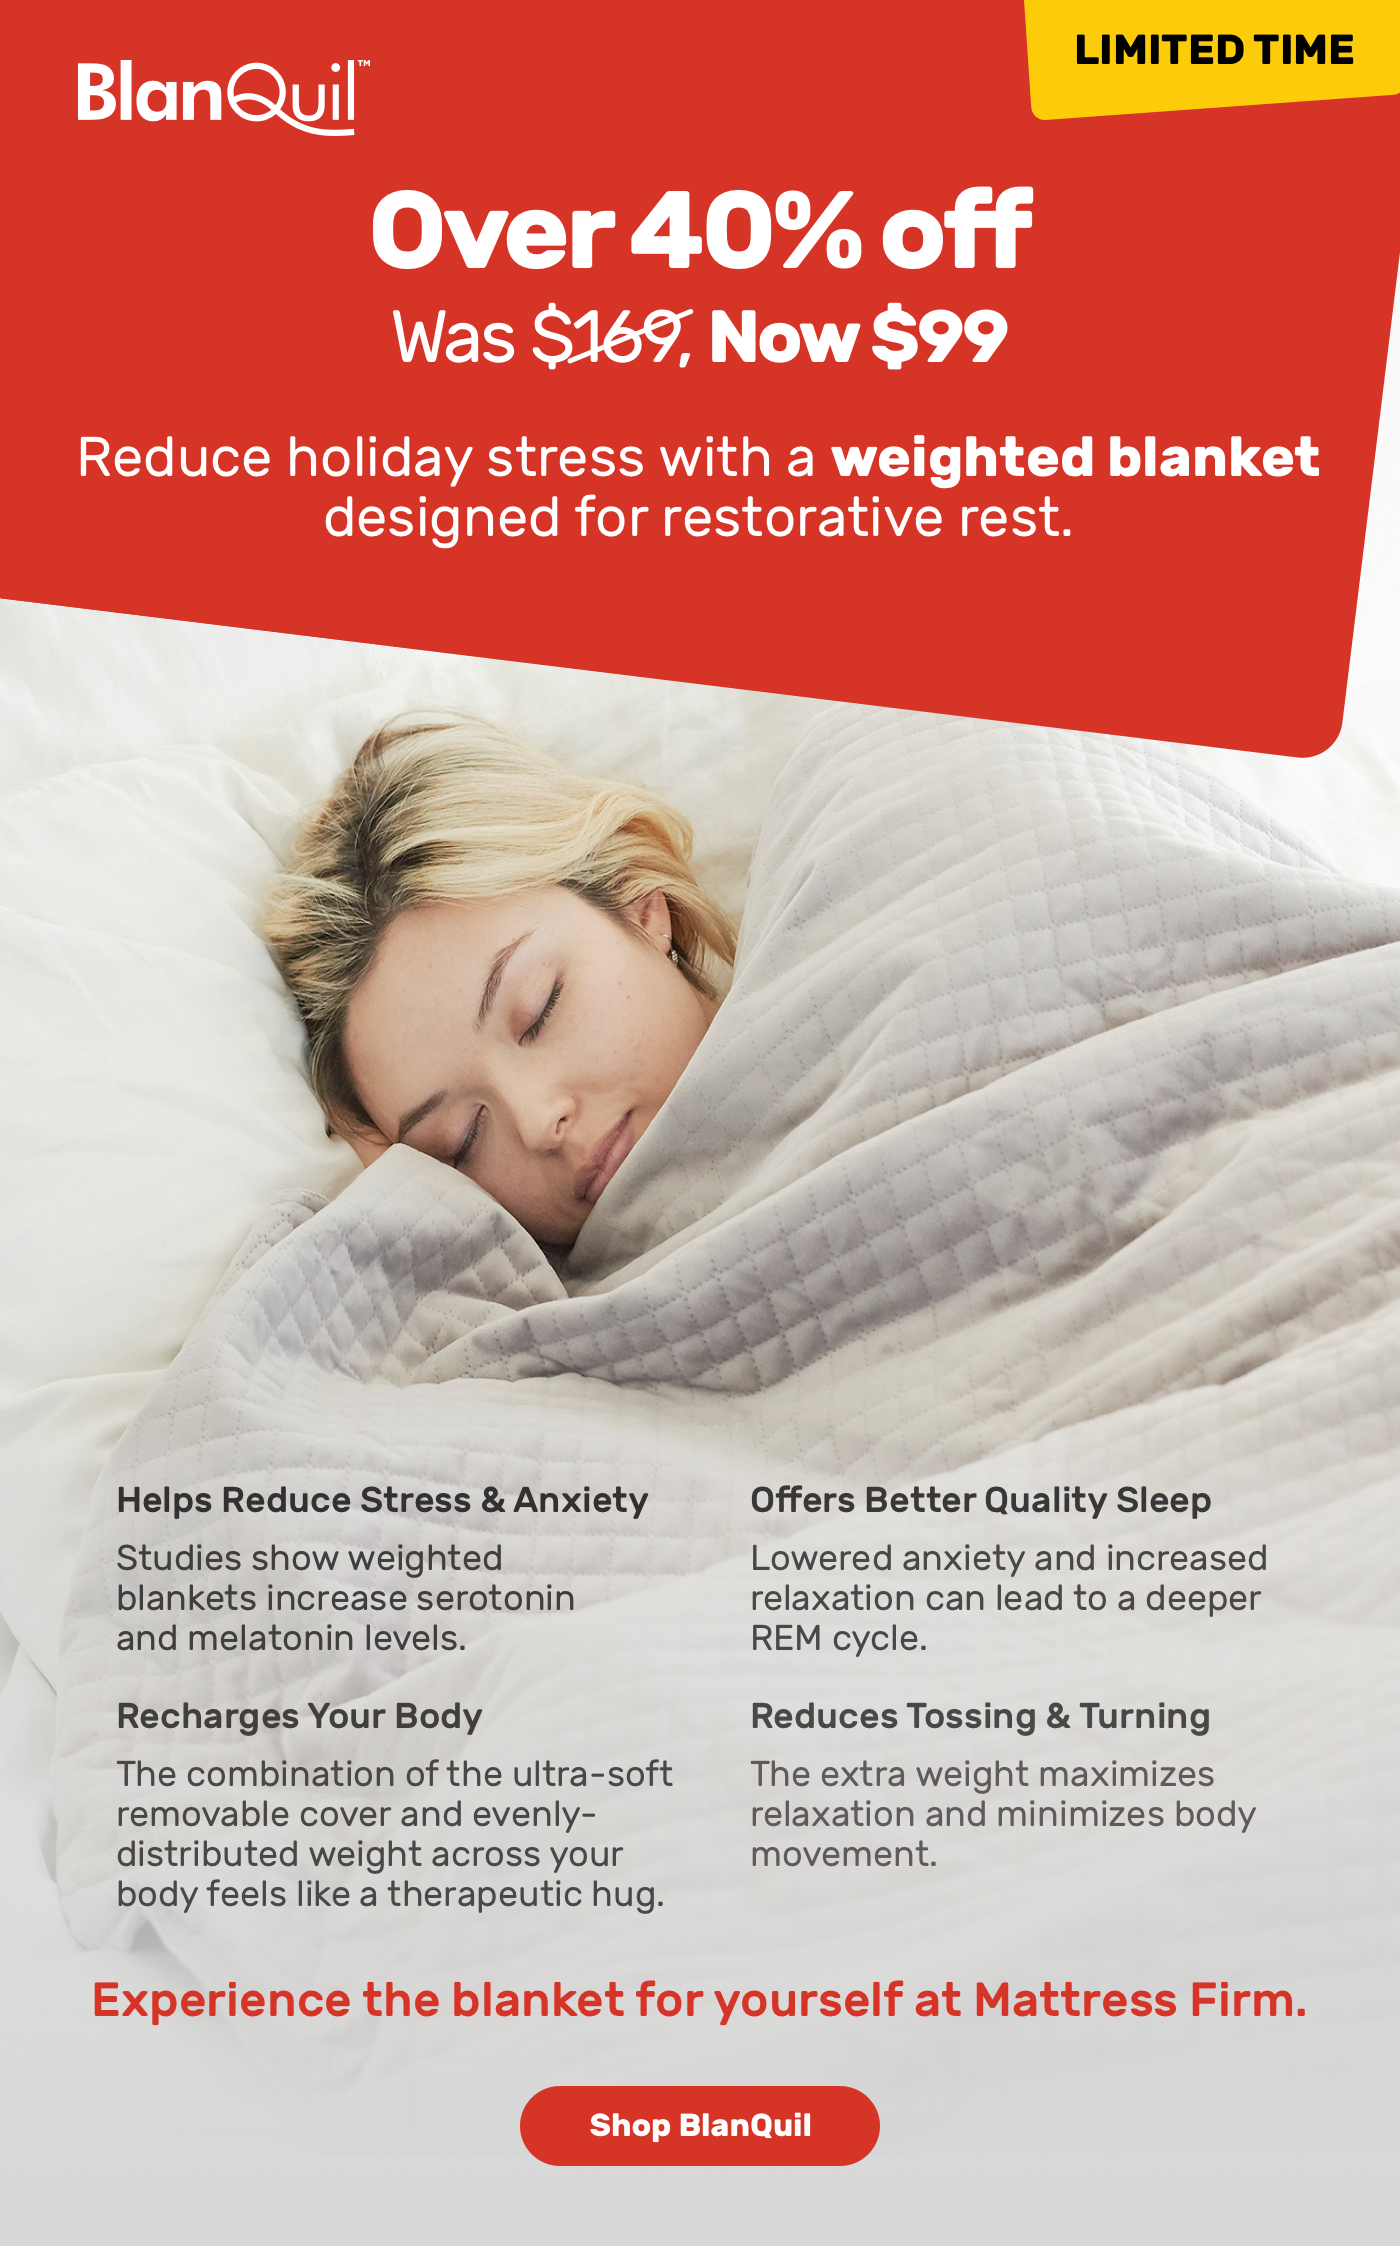 BlanQuil Limited Time Over 40% off. Reduce holiday stress with a weighted blanket designed for restorative rest. 